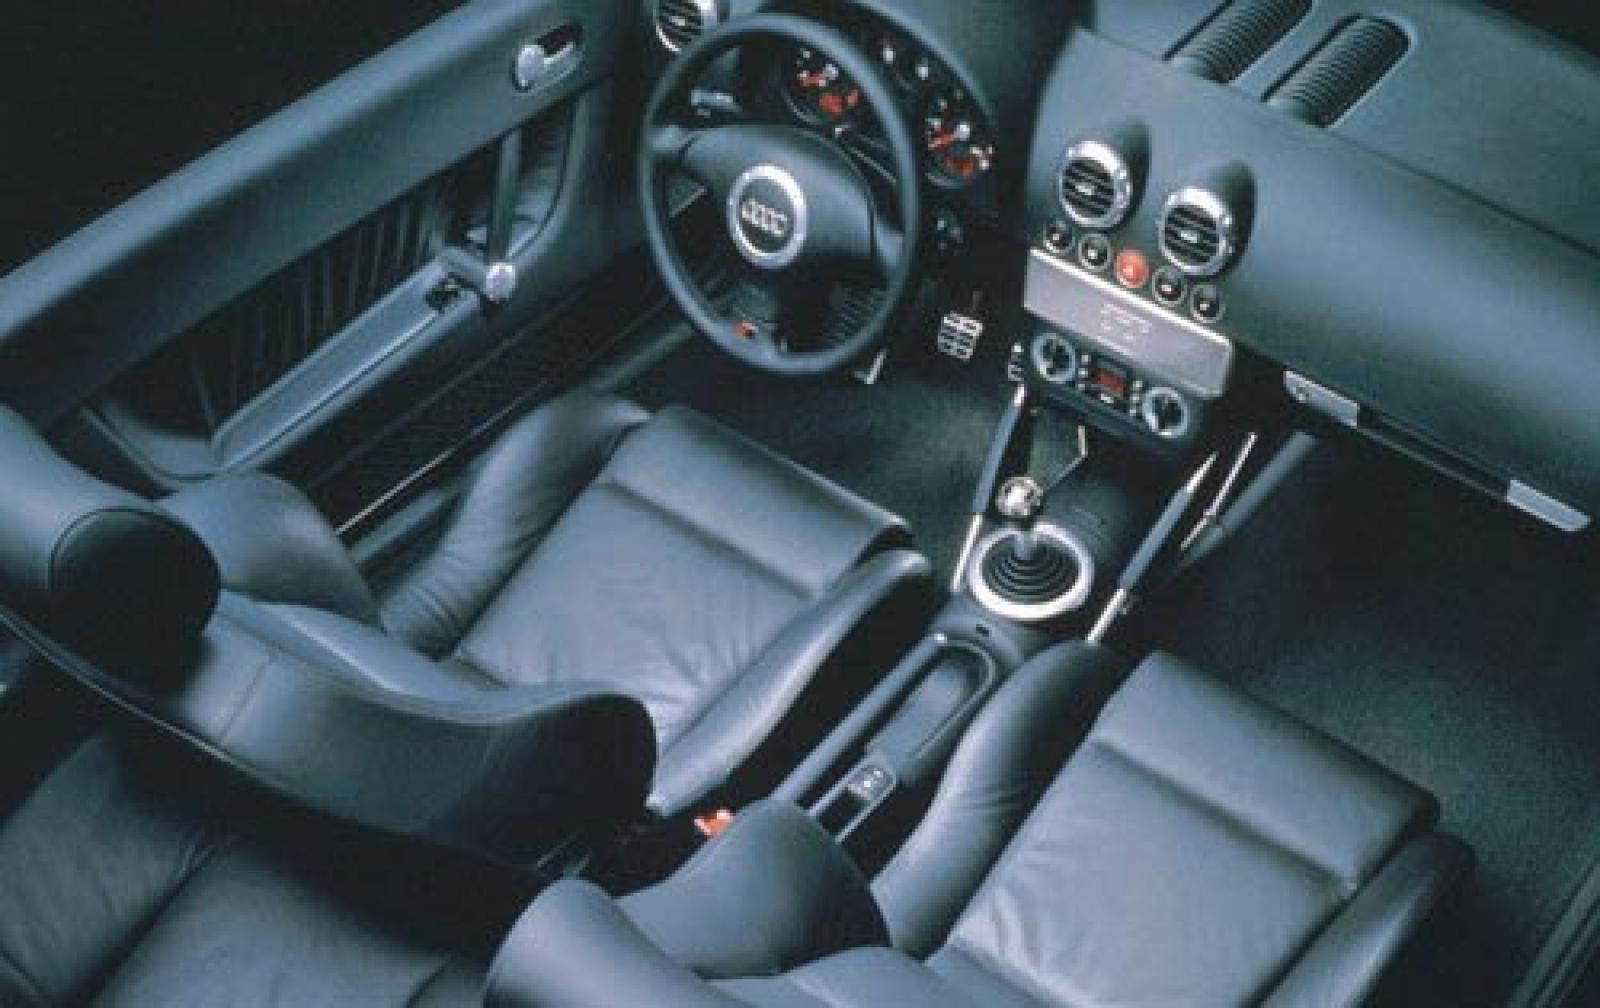 2002 Audi Tt Information And Photos Neo Drive